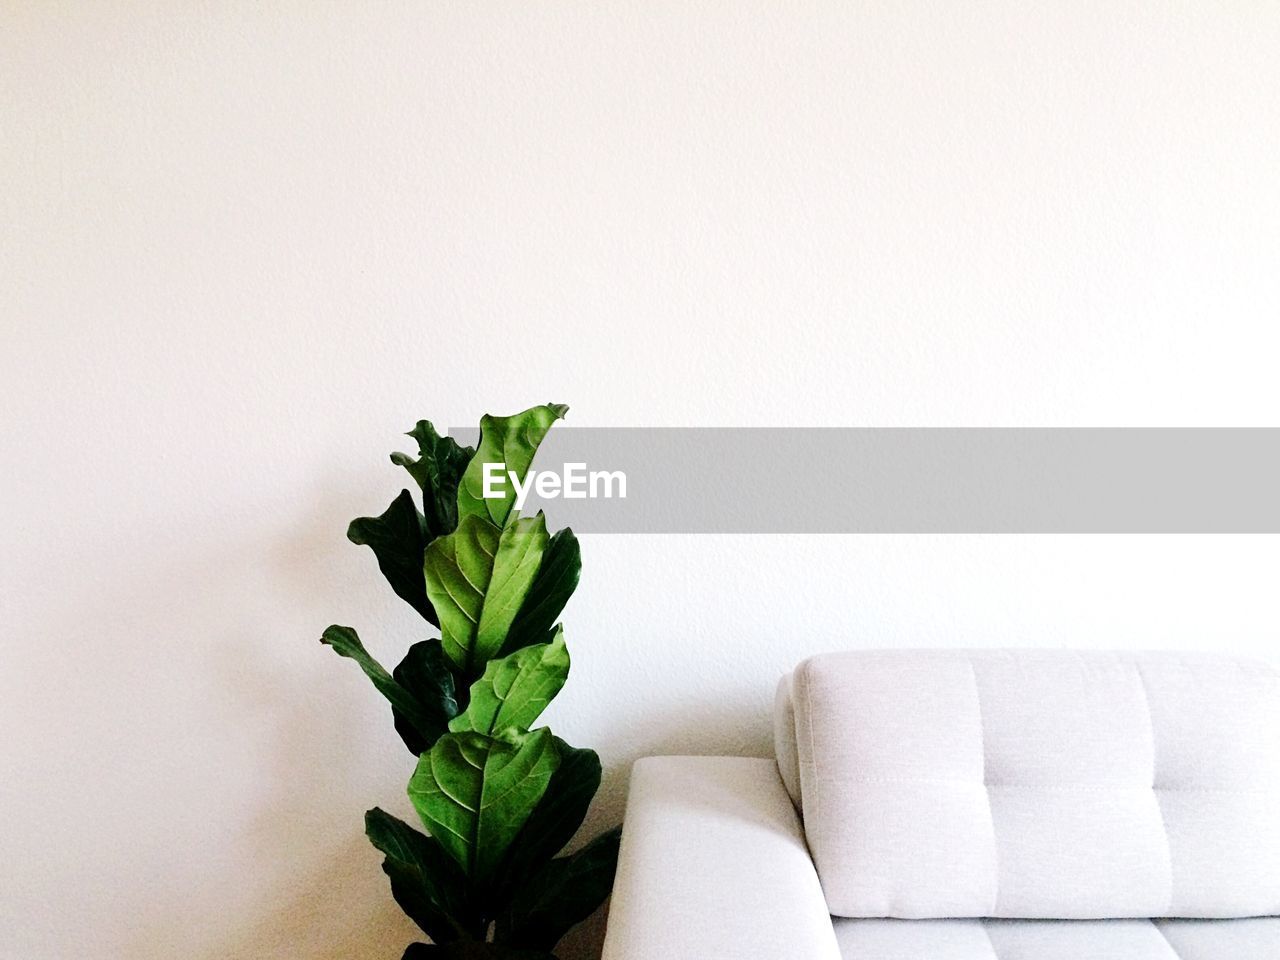 Houseplant by sofa against white wall at home